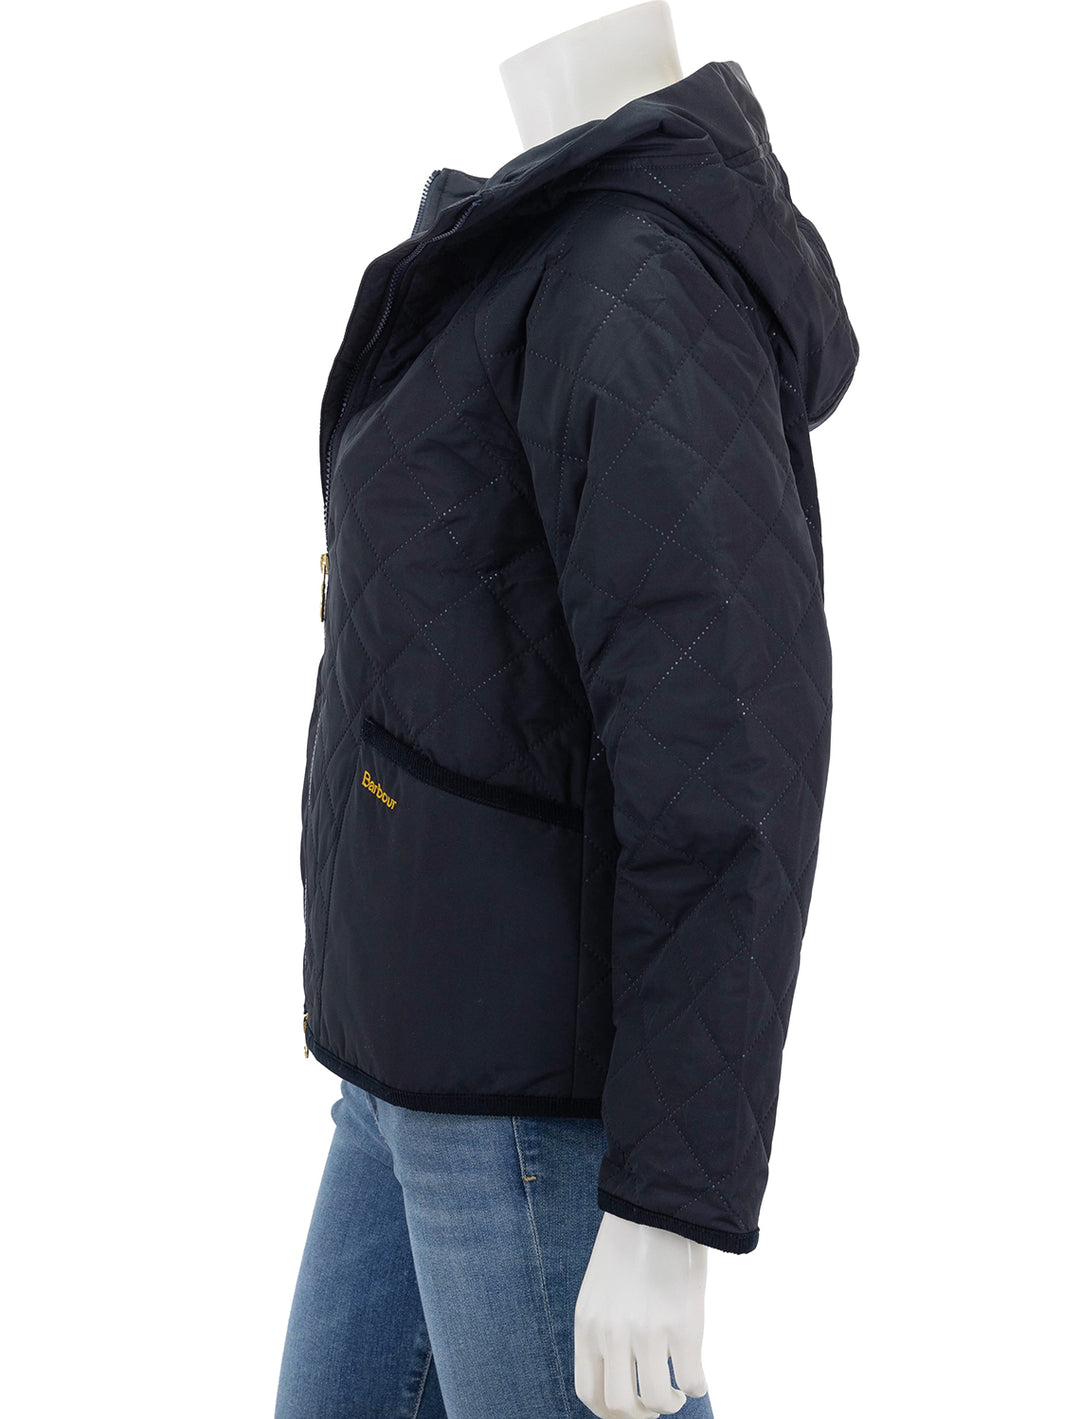 Side view of Barbour's glamis quilt jacket in dark navy.